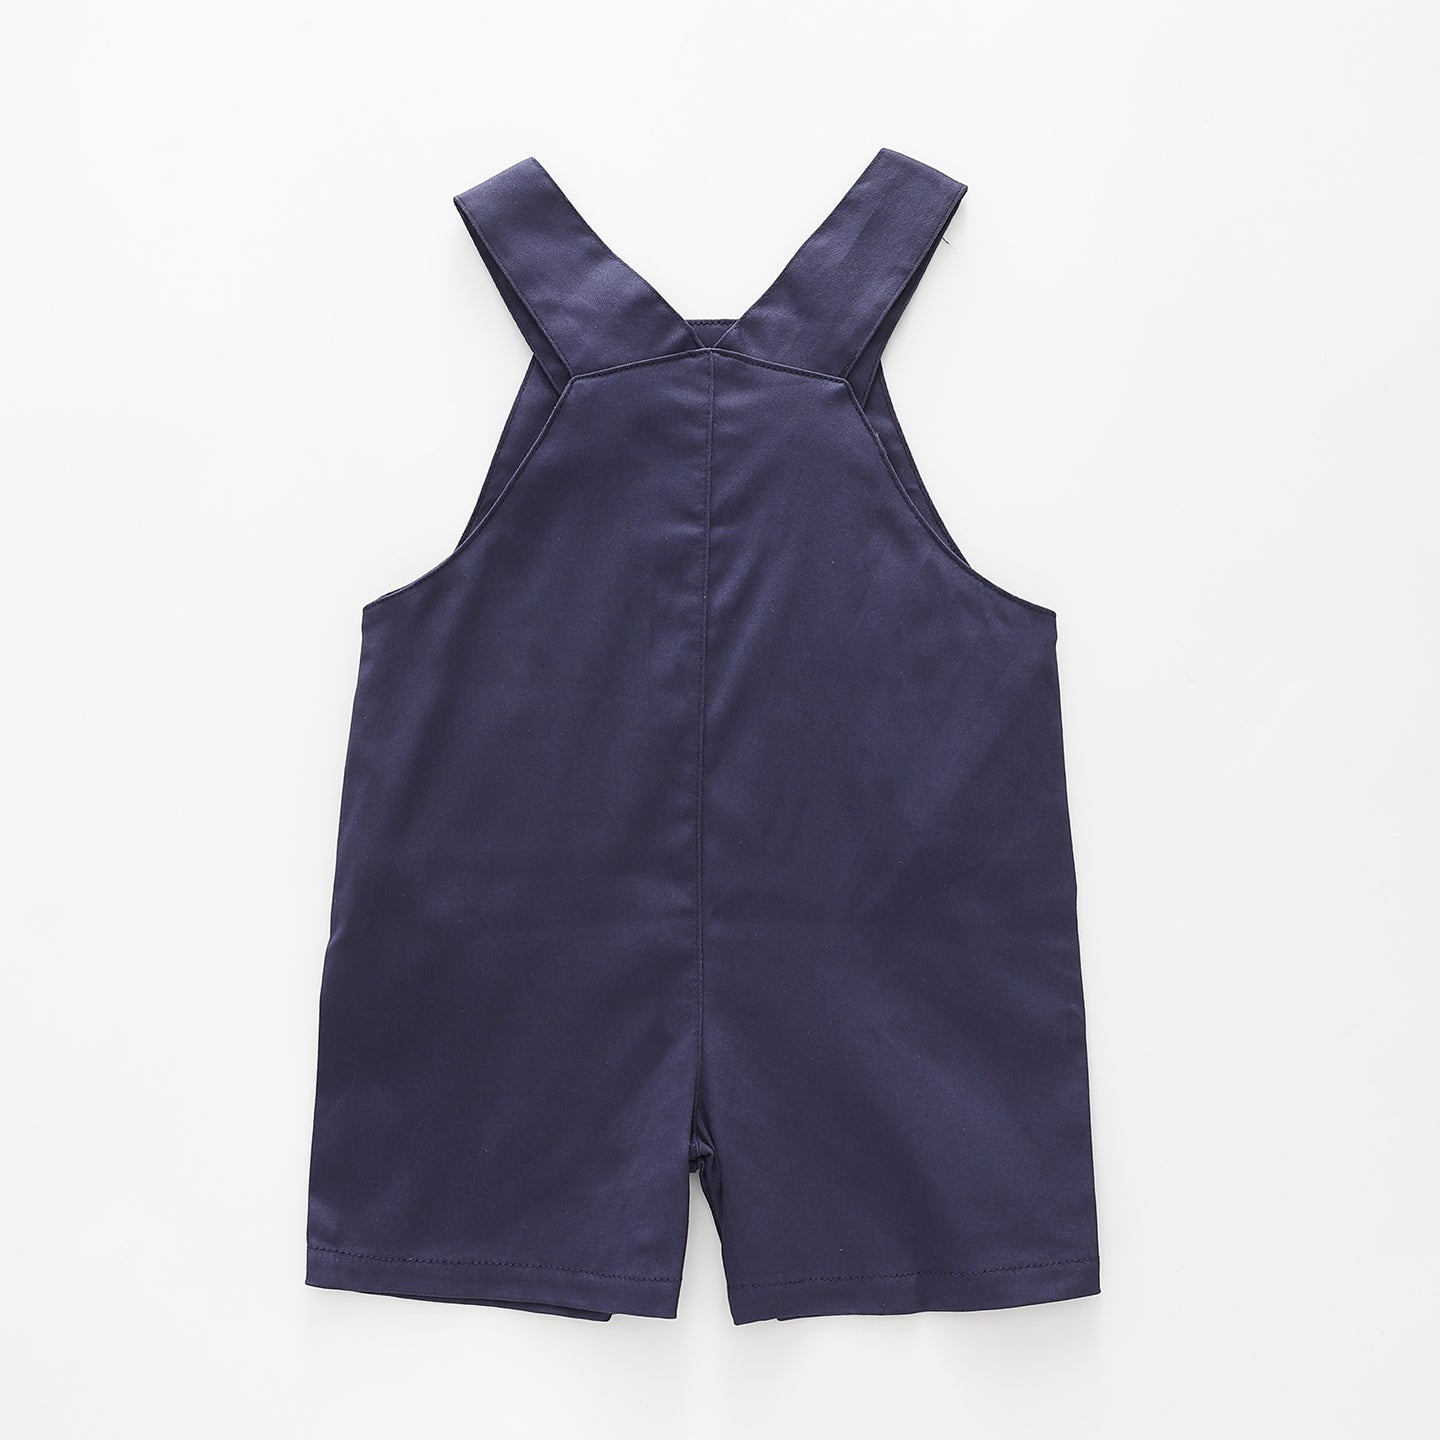 Infant and Toddler Boys Navy Blue Overalls